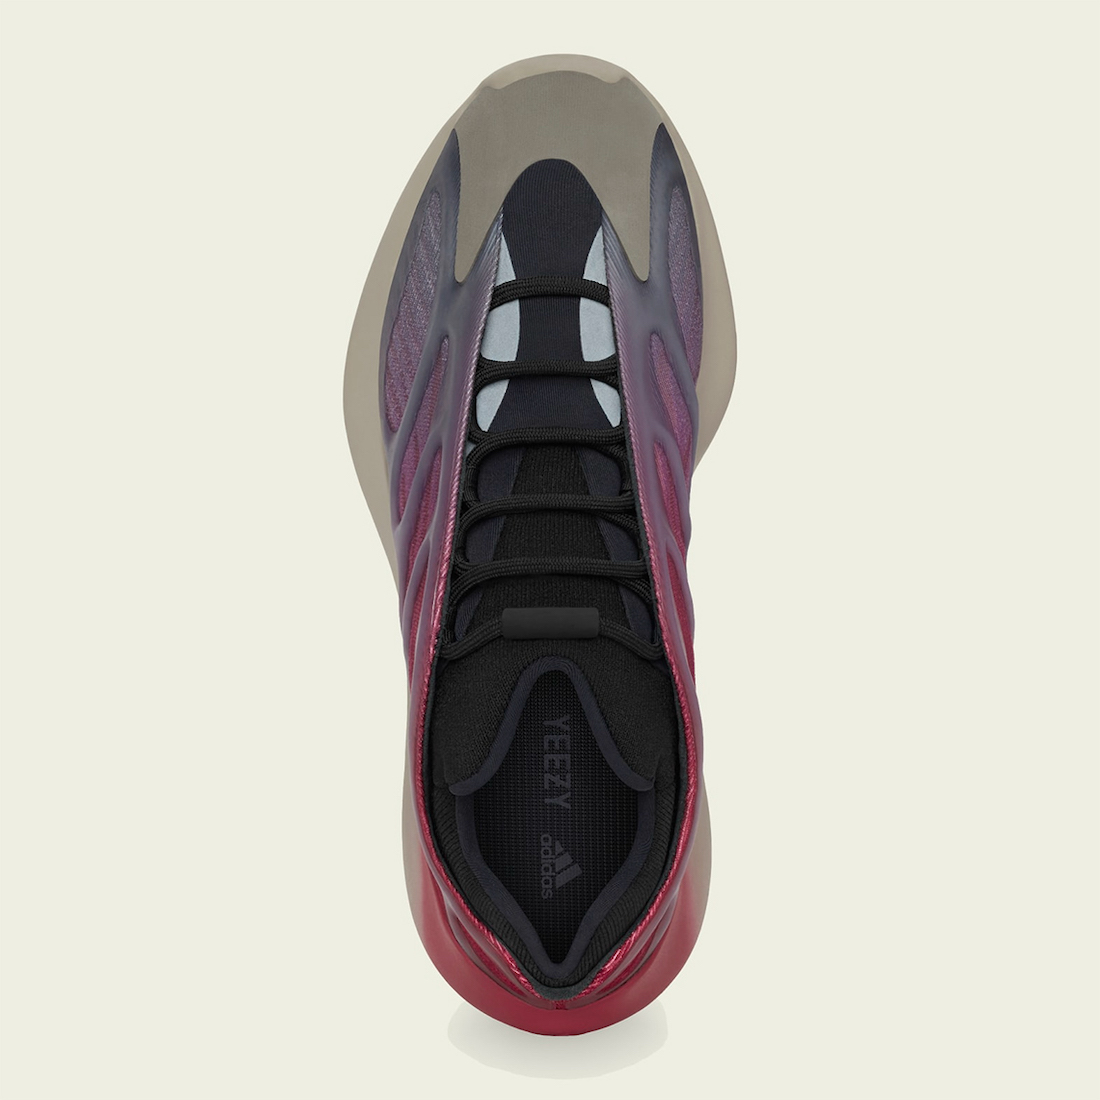 adidas-Yeezy-700-V3-Fade-Carbon-GW1814-Release-Date-Price-3